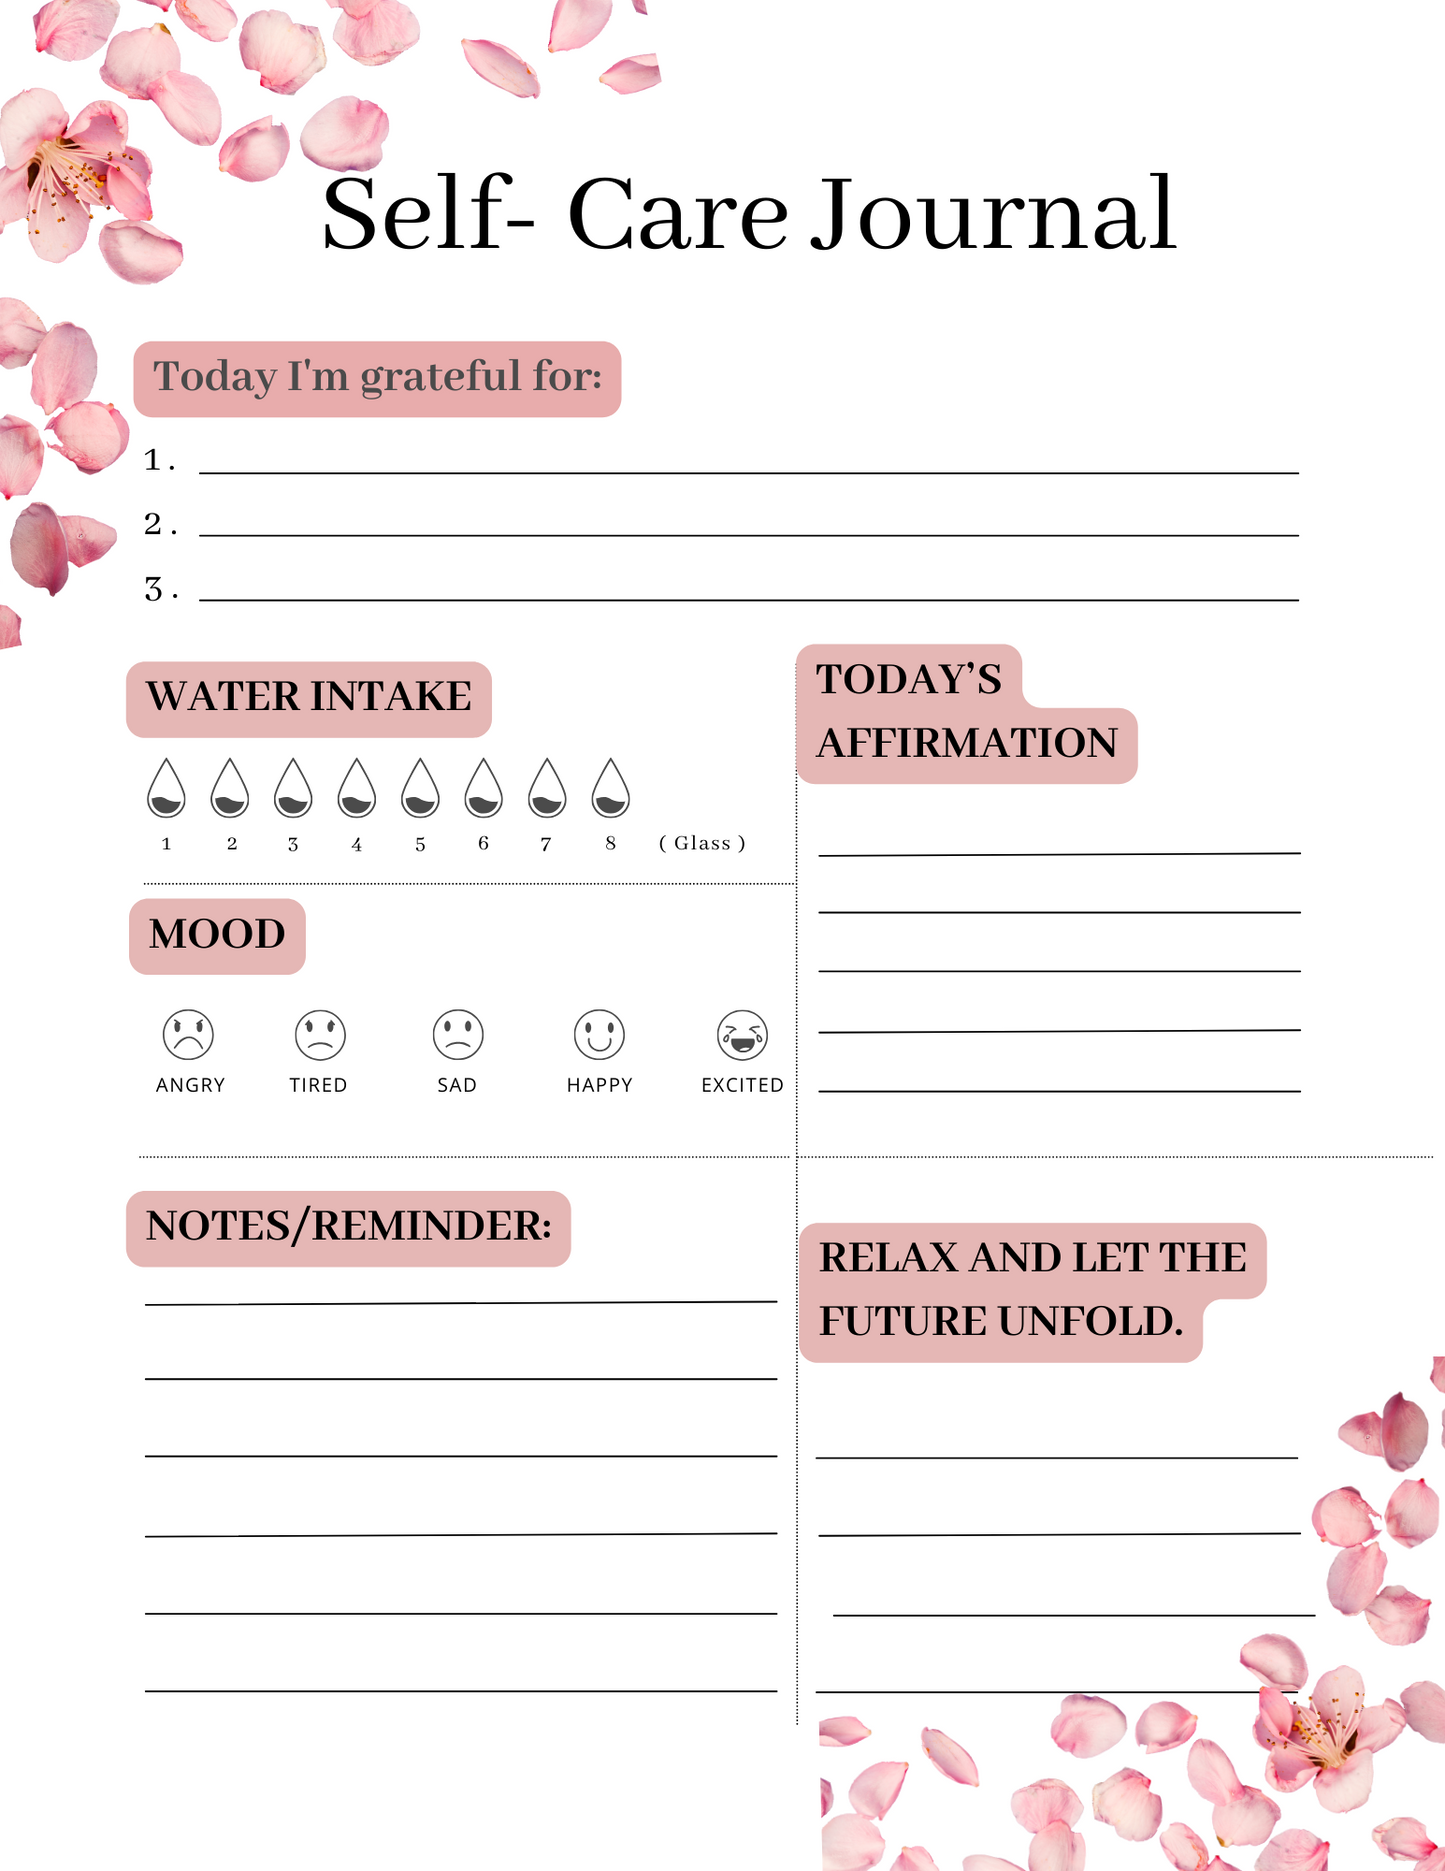 Self-Care Journal with MRR/ PLR